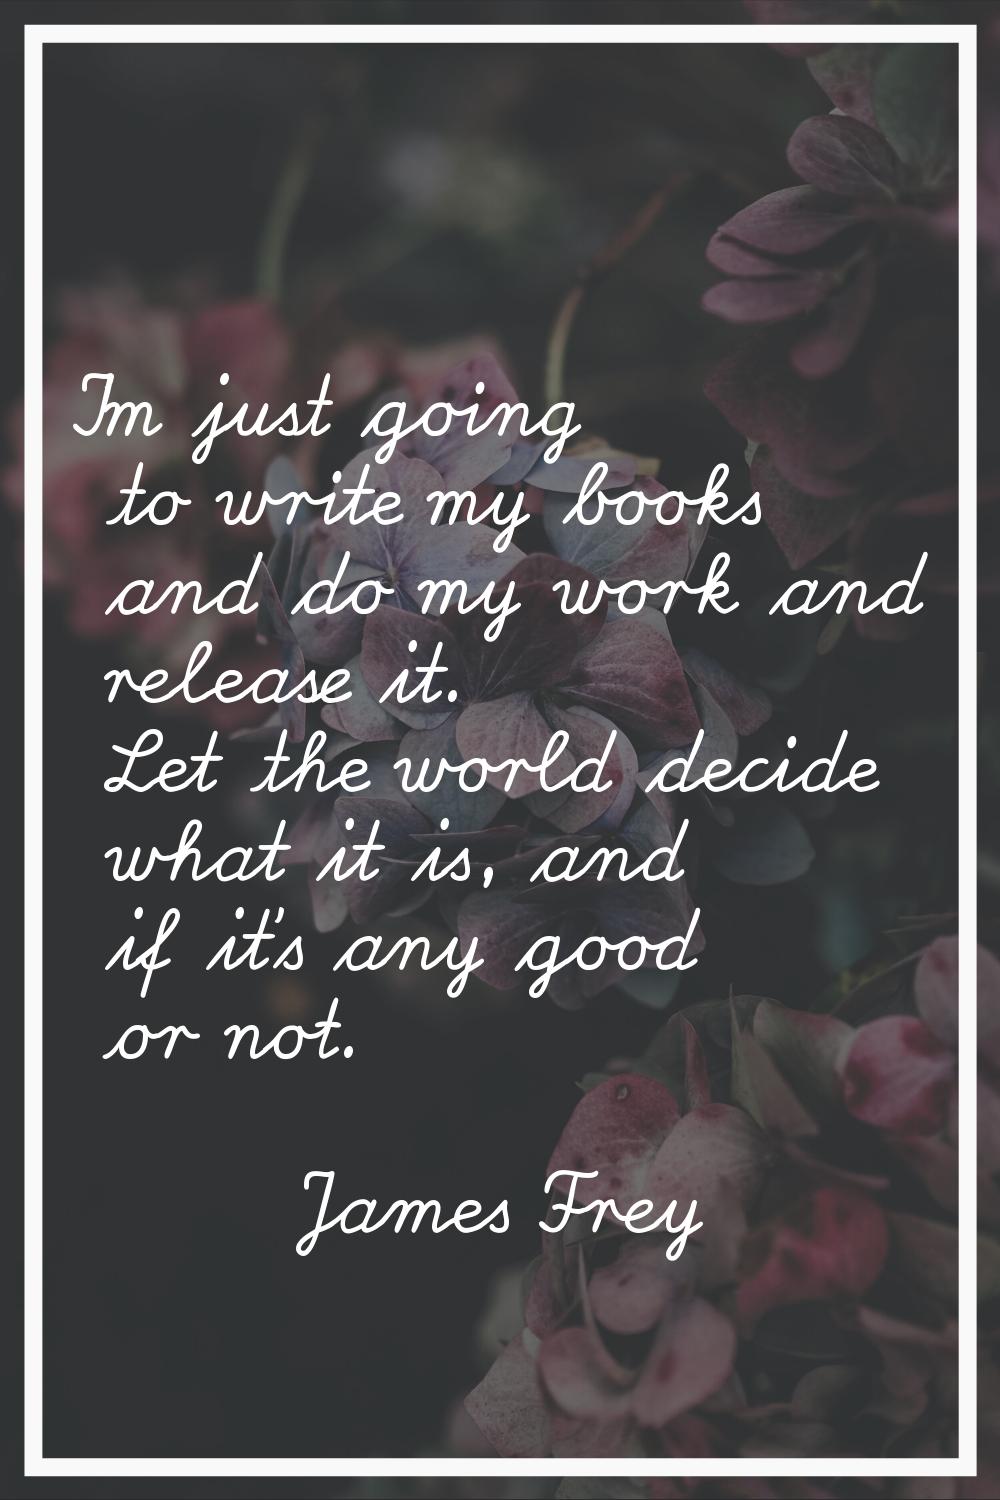 I'm just going to write my books and do my work and release it. Let the world decide what it is, an